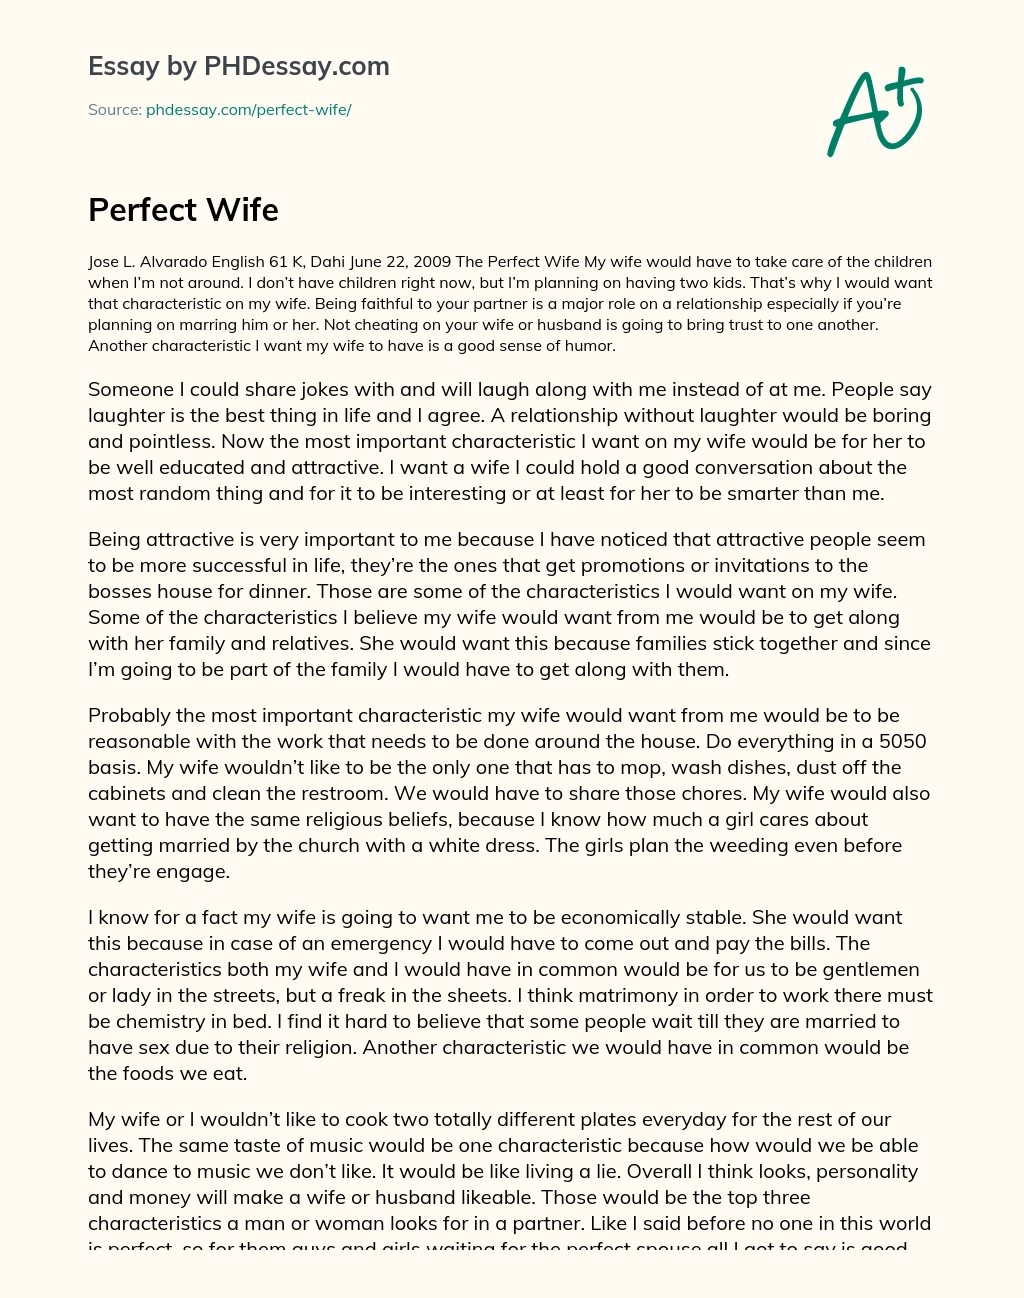 Perfect Wife essay